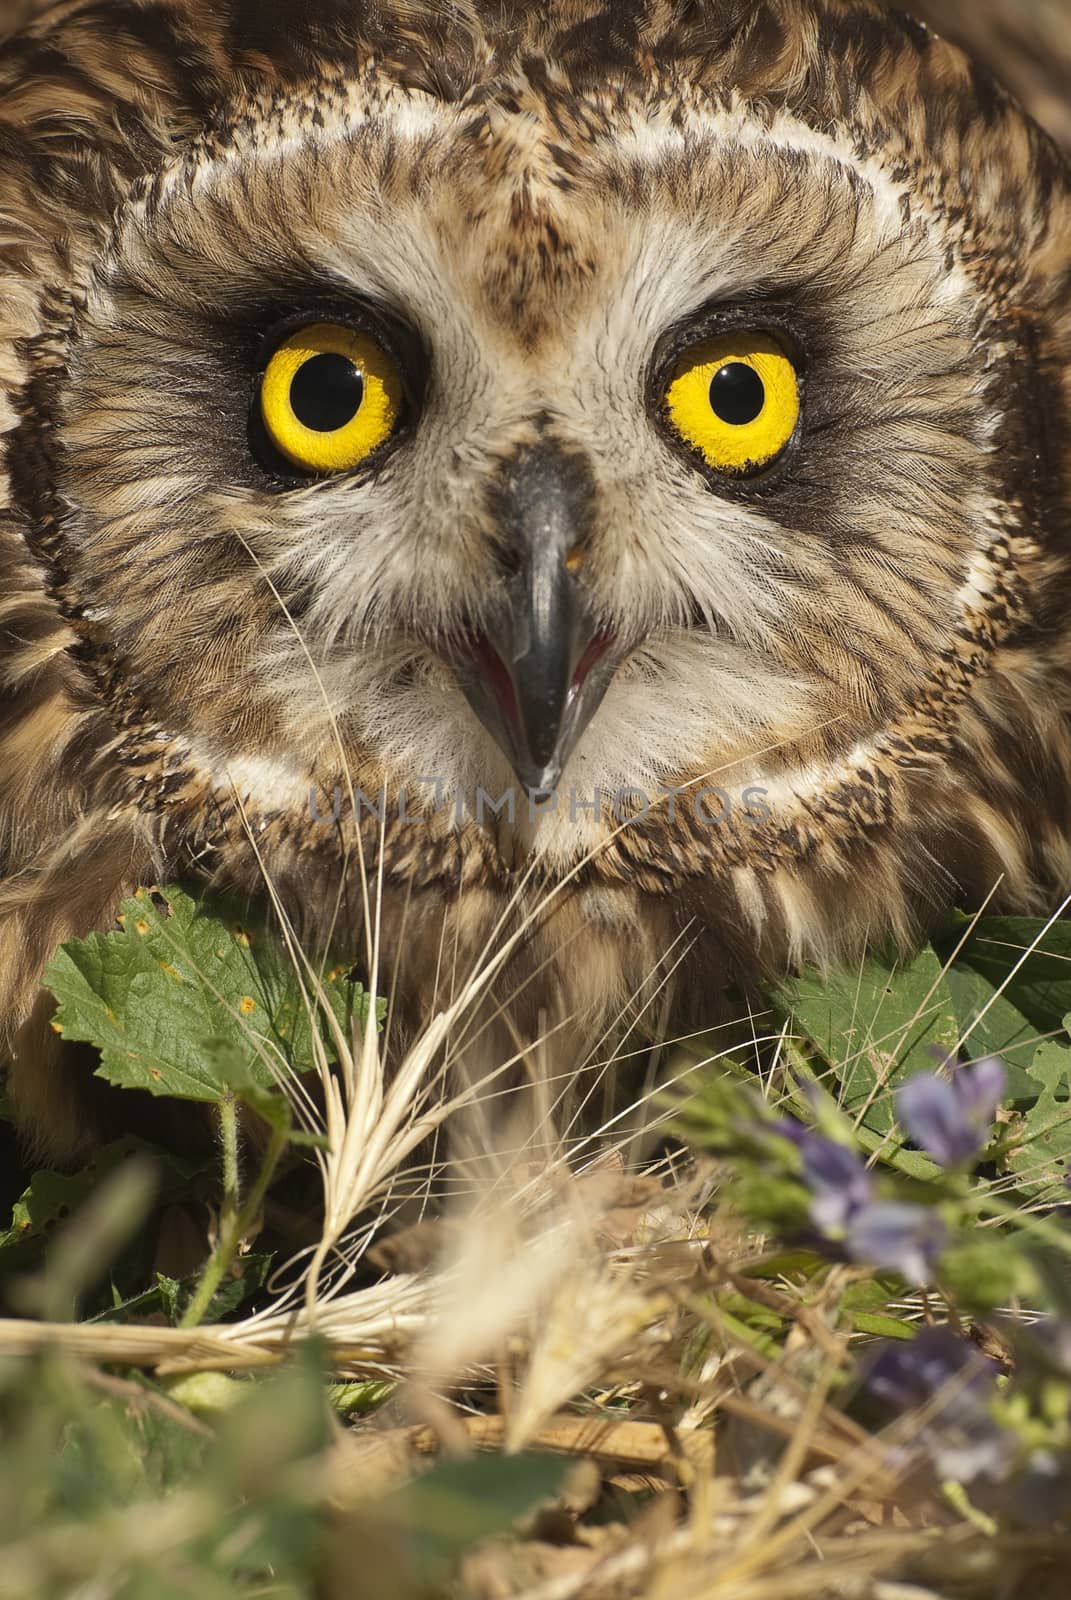 Short eared owl, Asio flammeus, country owl, portrait of eyes an by jalonsohu@gmail.com